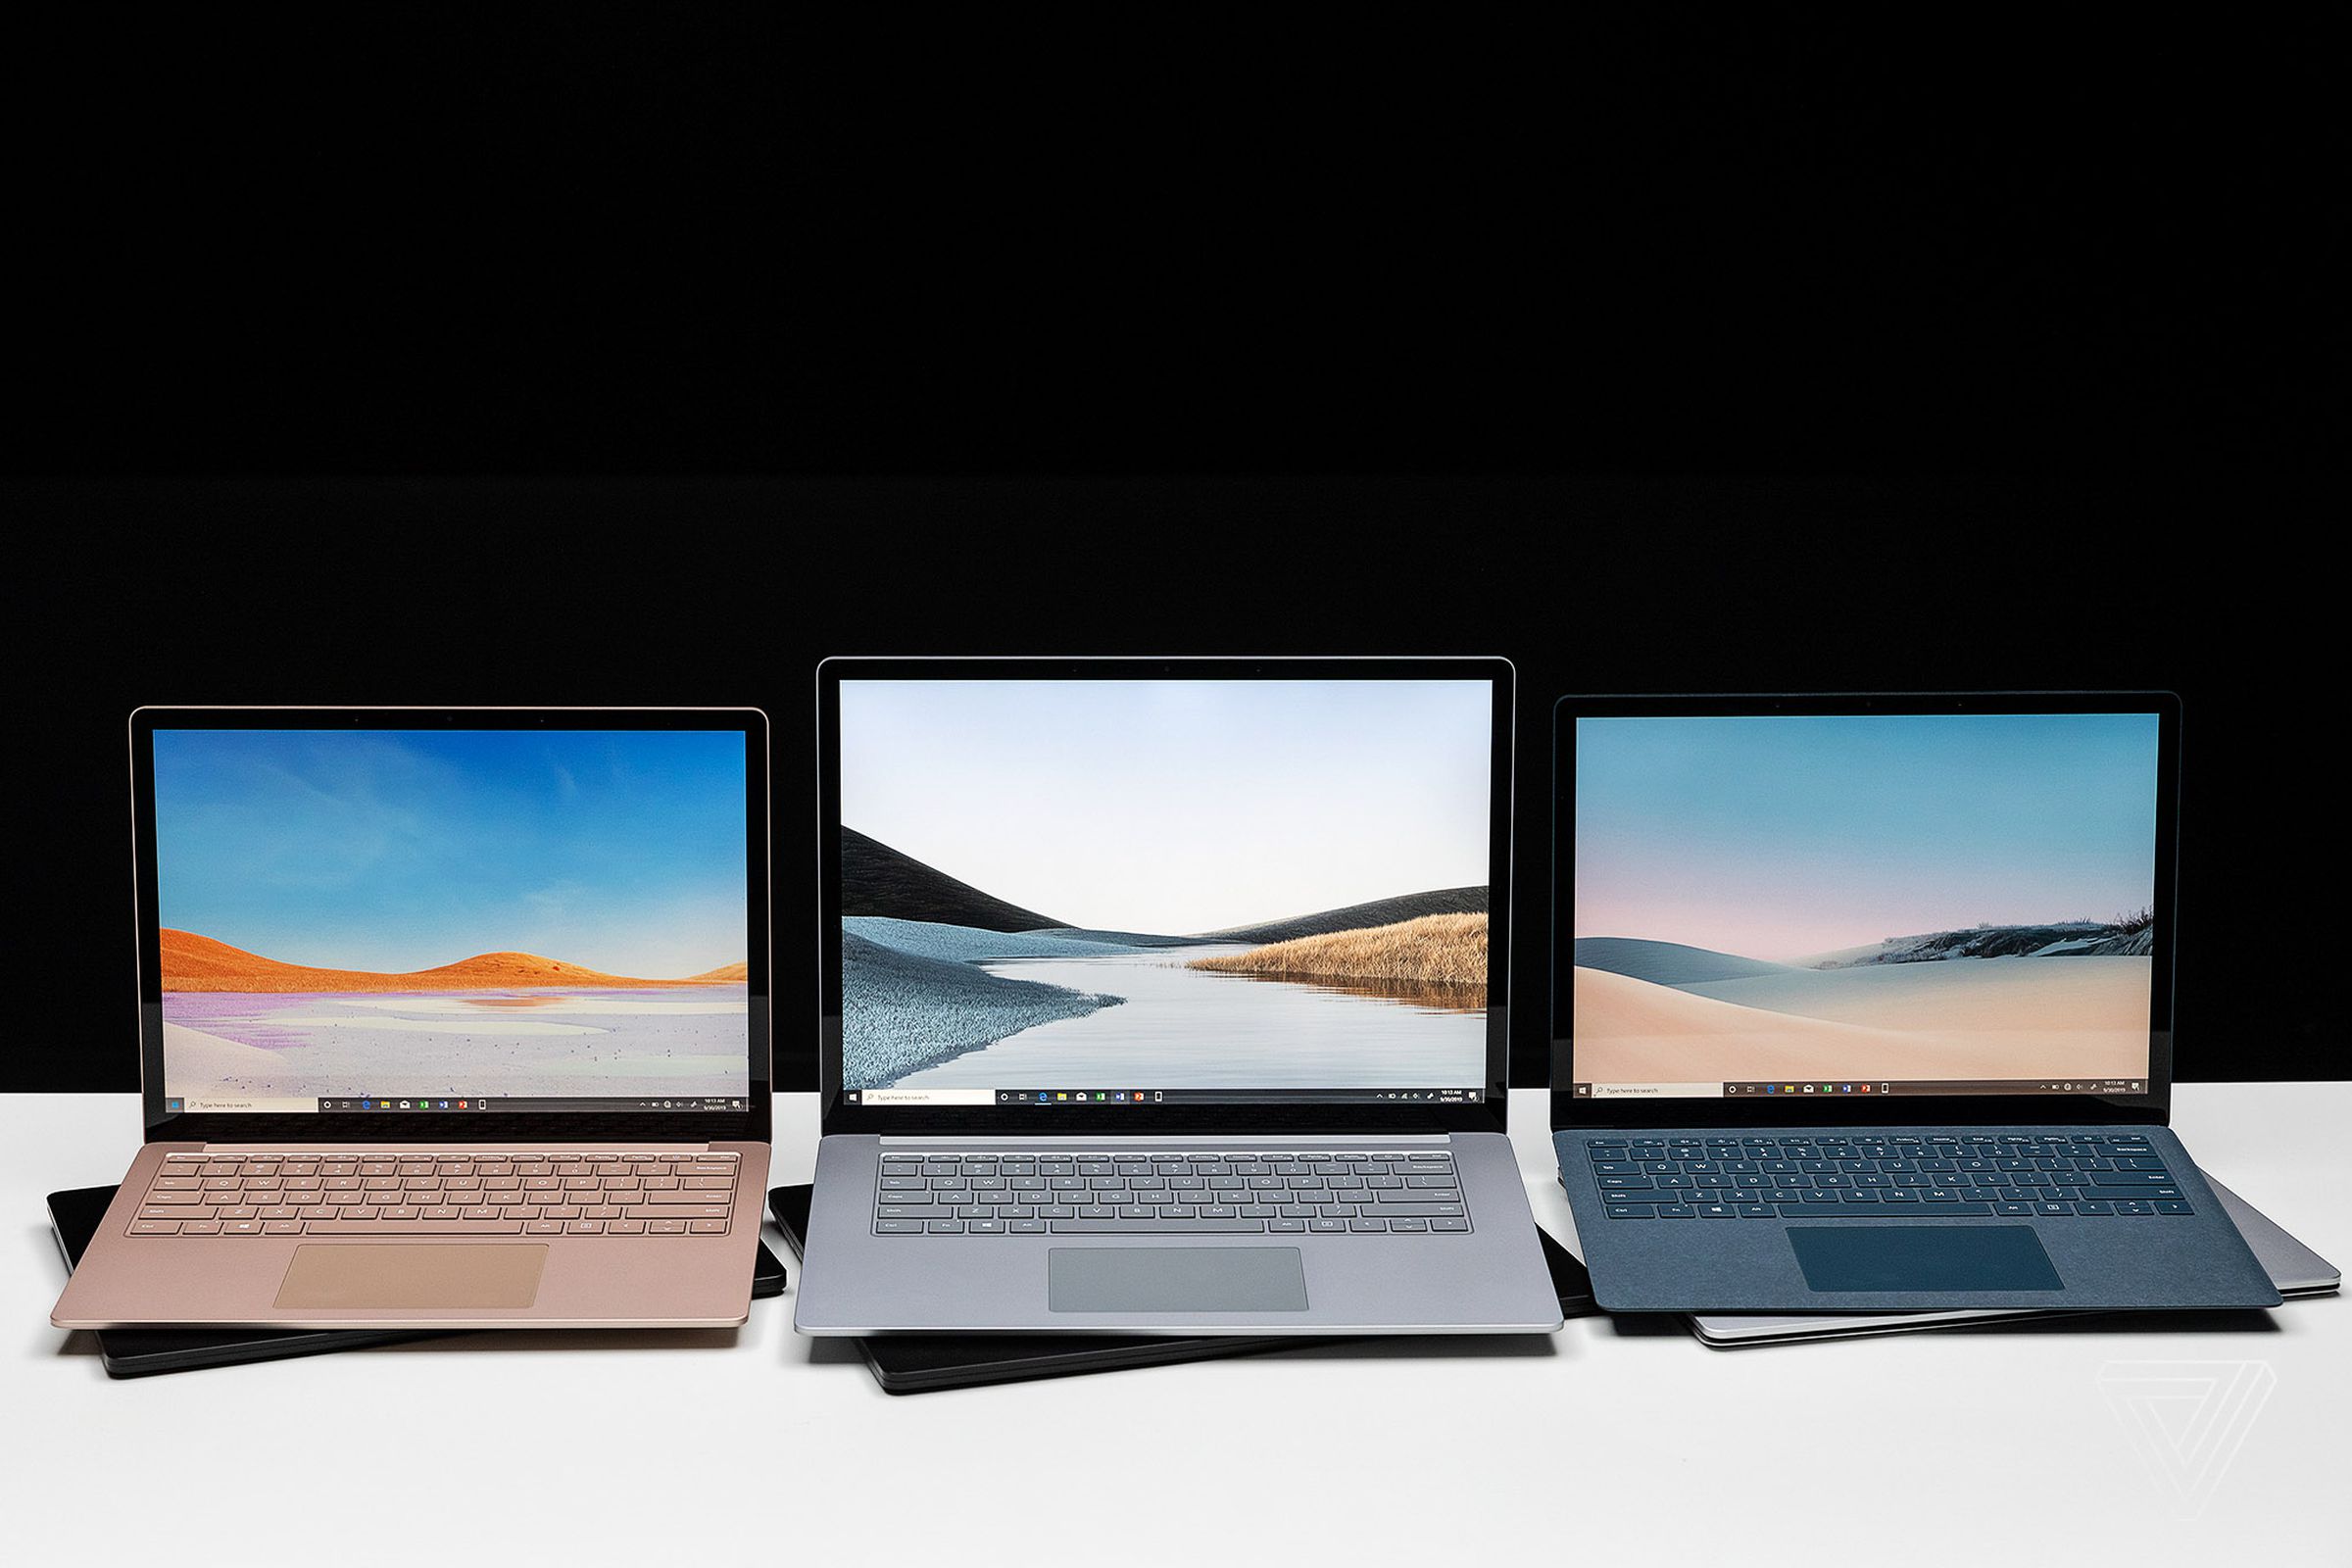 New Surface Laptop 3 devices